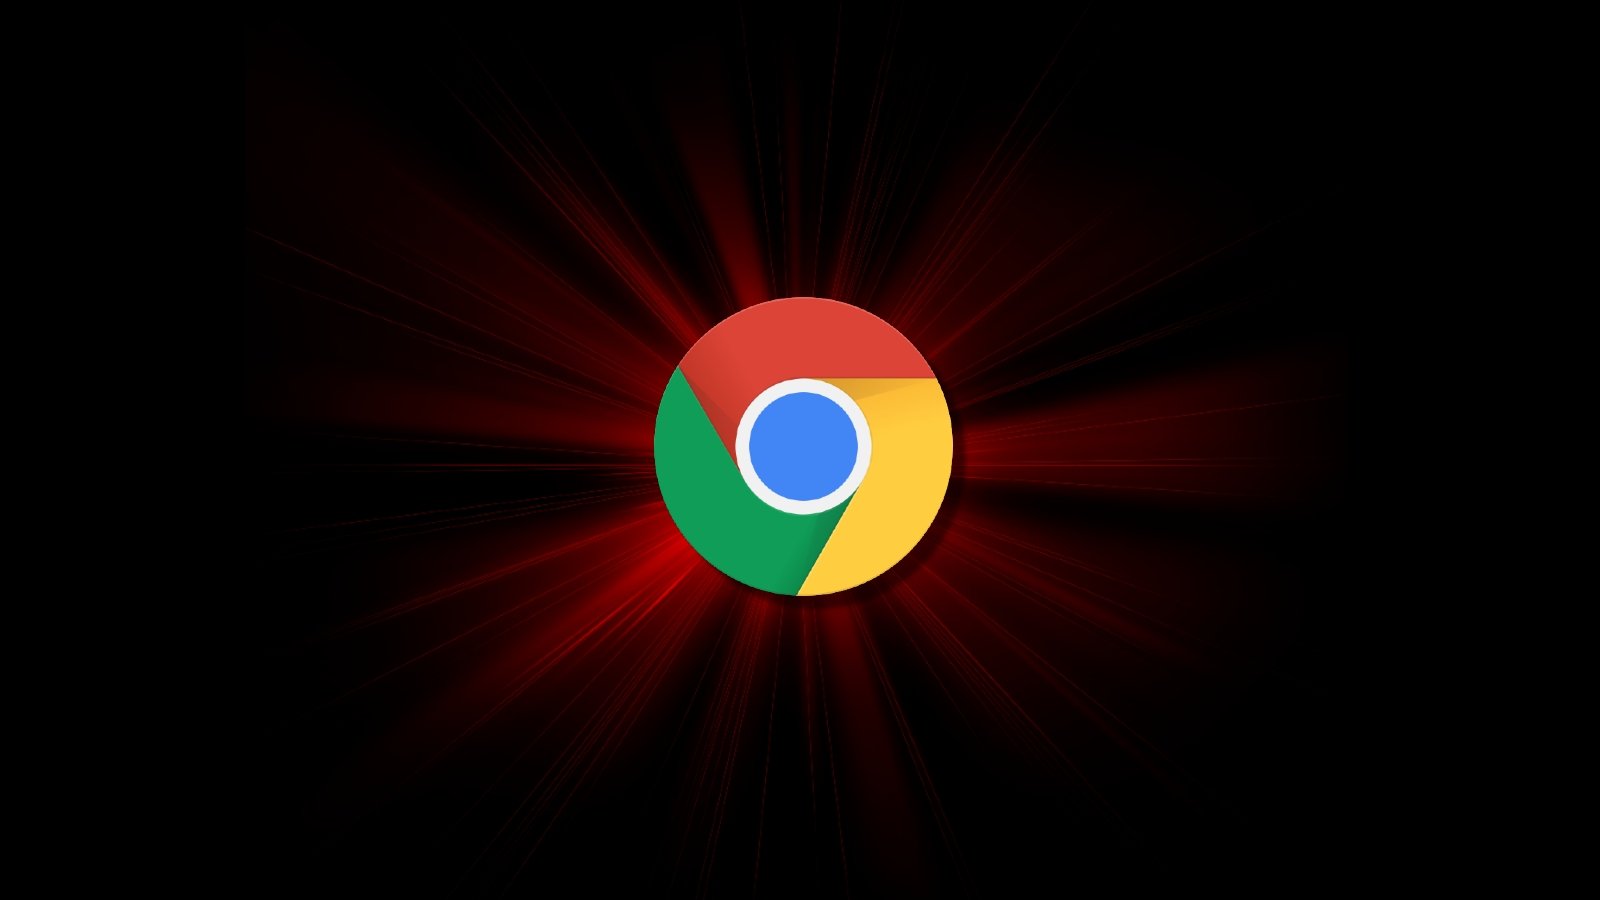 Fake VPN Chrome extensions force-installed 1.5 million times